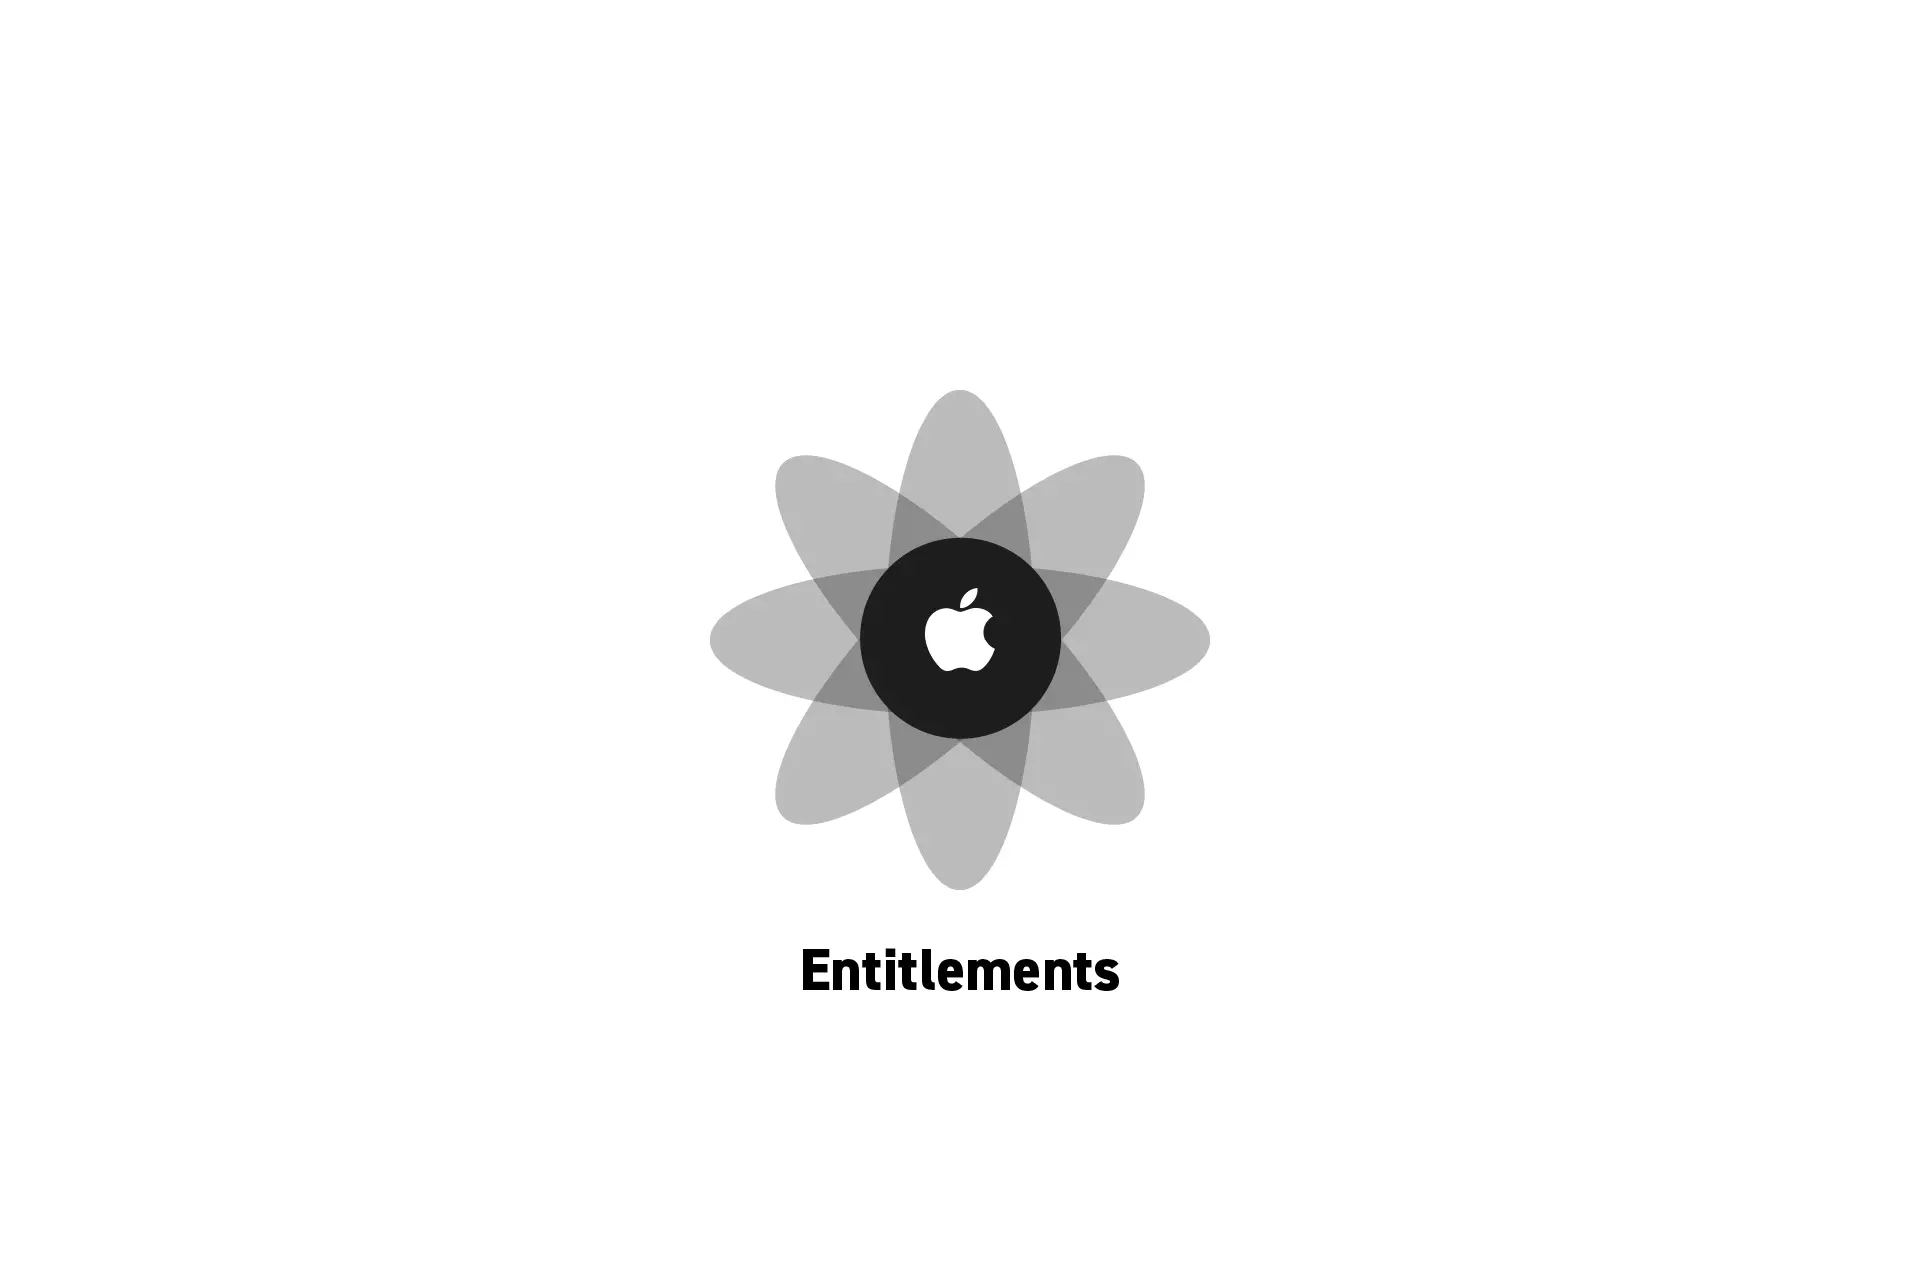 A flower that represents Apple with the text "Entitlements" beneath it.